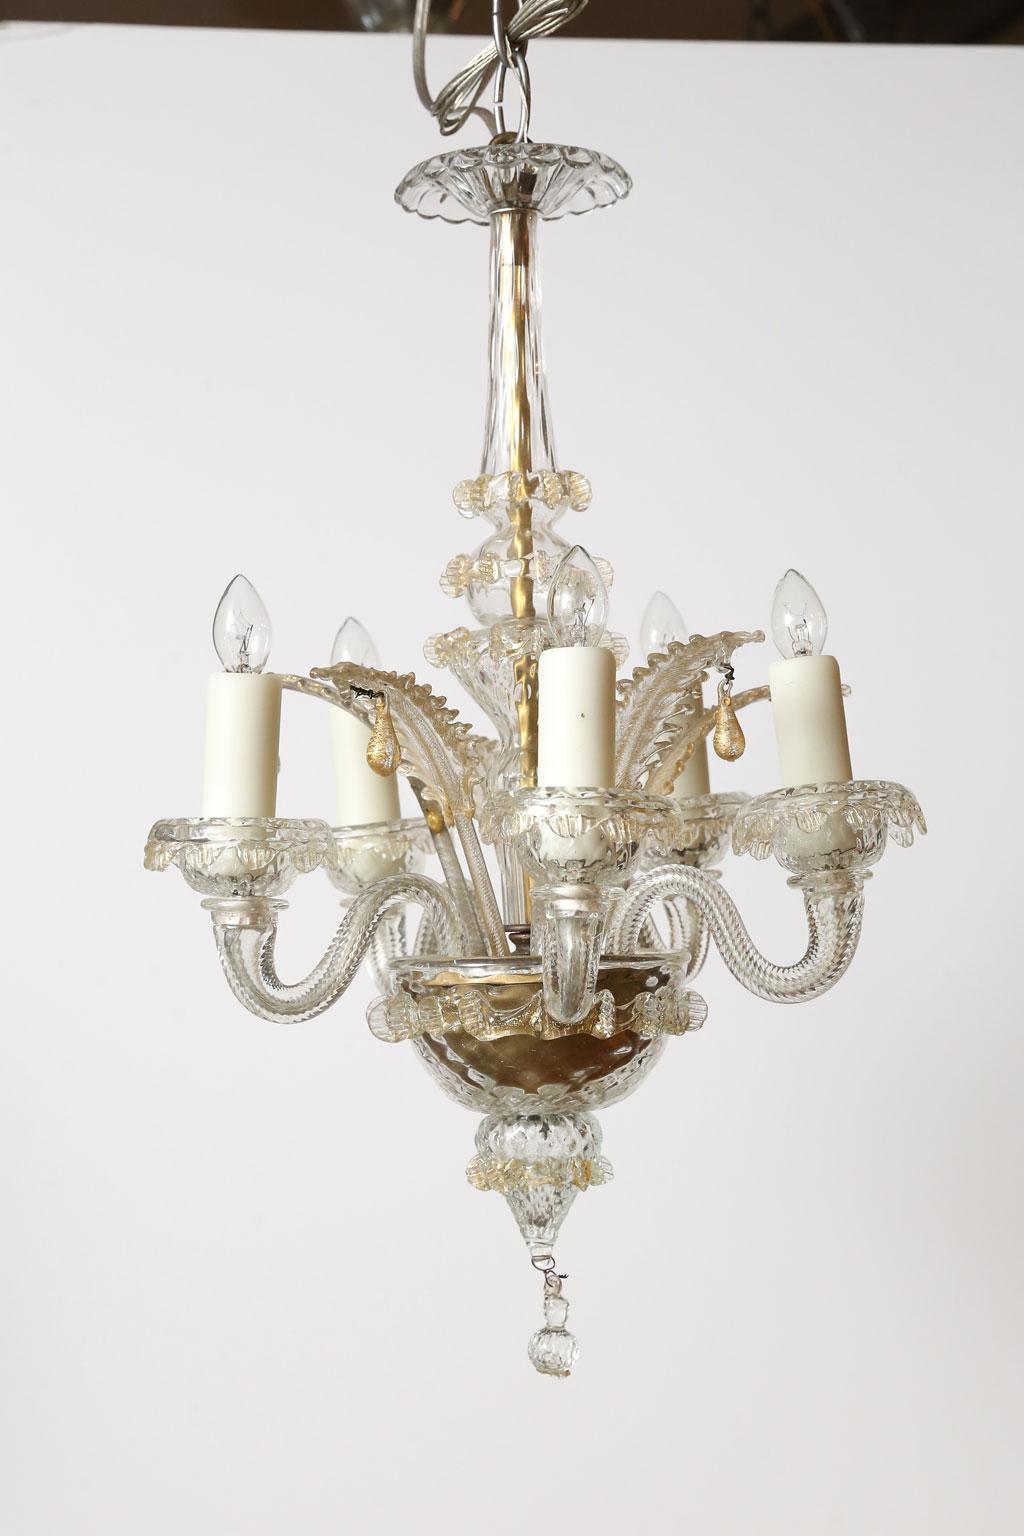 Small gold flecked Murano chandelier from Italy, circa 1930-1950. Clear hand blown glass chandelier decorated with gold flecks. Six arms accommodating candelabra-size sockets. Newly wired for use within the USA. Includes chain and a canopy. The